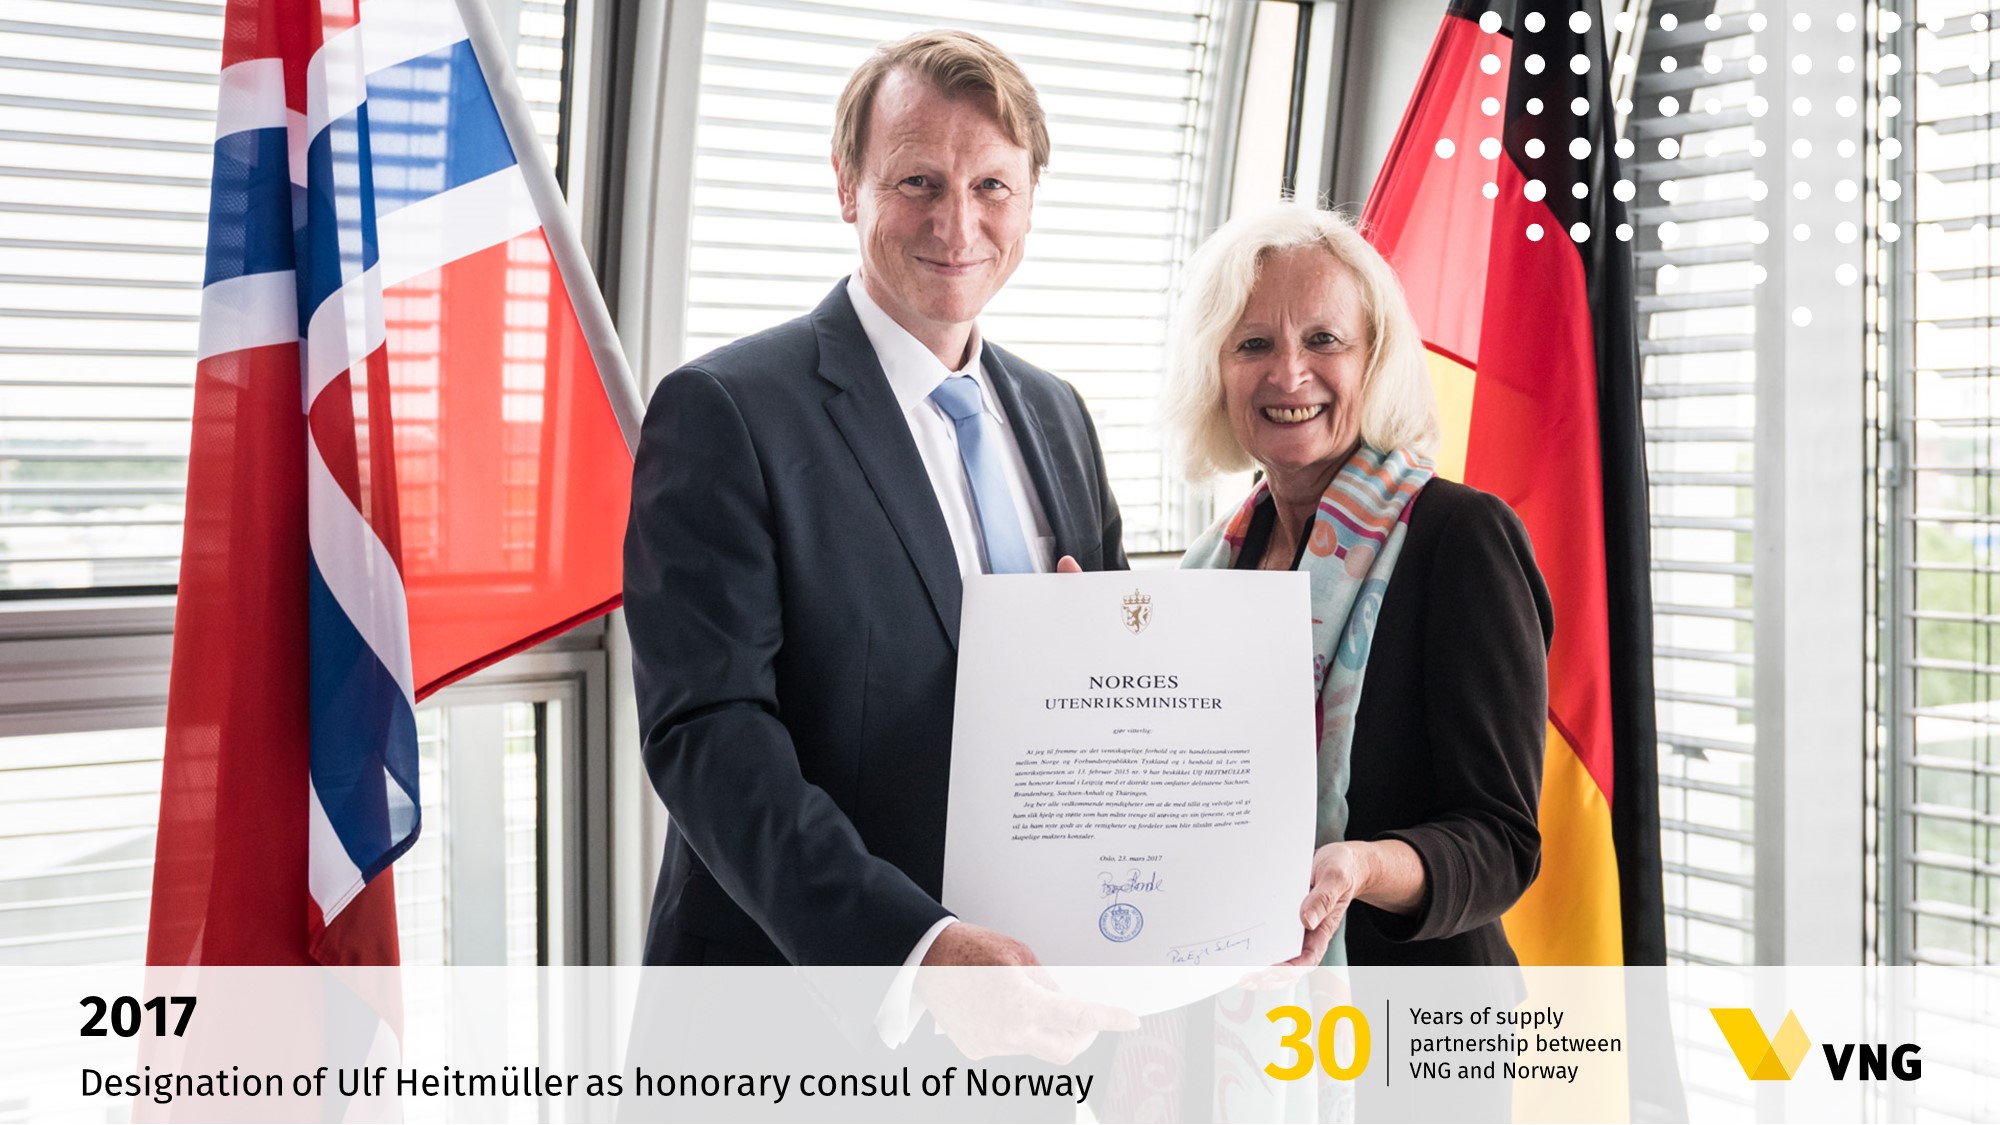 2017 Designation of Ulf Heitmüller as honorary consul of Norway